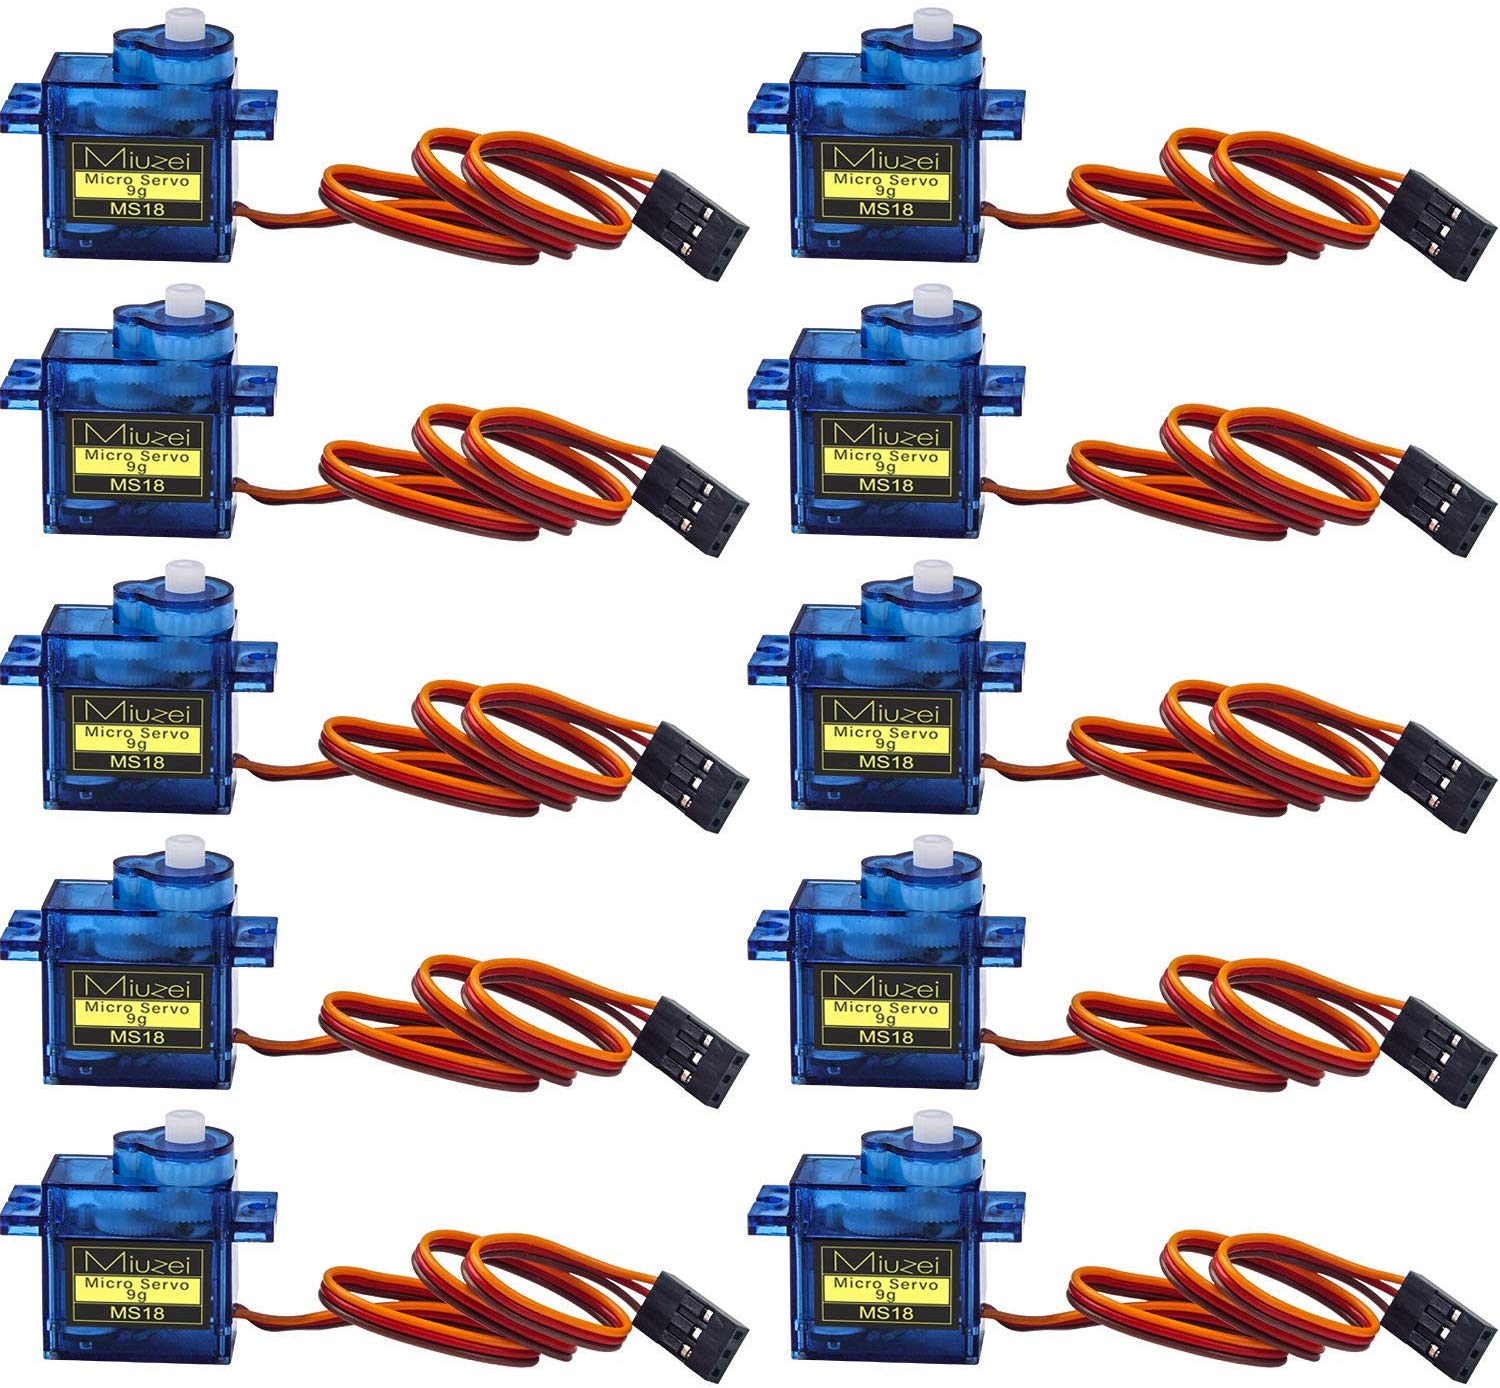 Miuzei 10 pcs SG90 9G Servo Motor Kit for RC Robot Arm Helicopter Airplane Remote Control